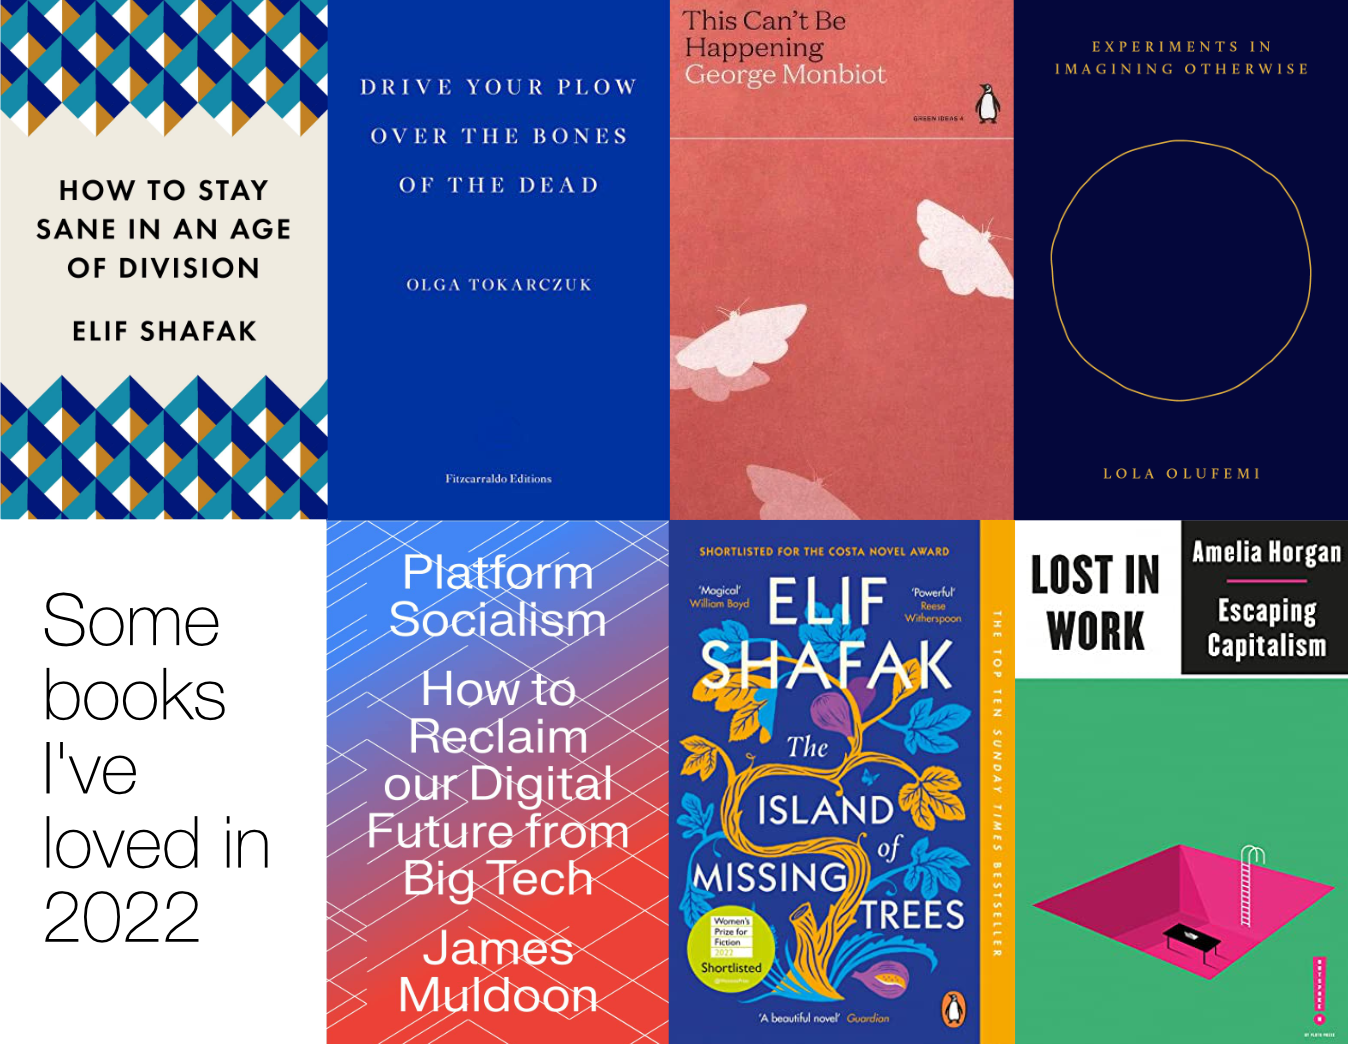 Image of the 7 book covers mentioned in the blog post below. The image its titled Some books I've loved in 2022